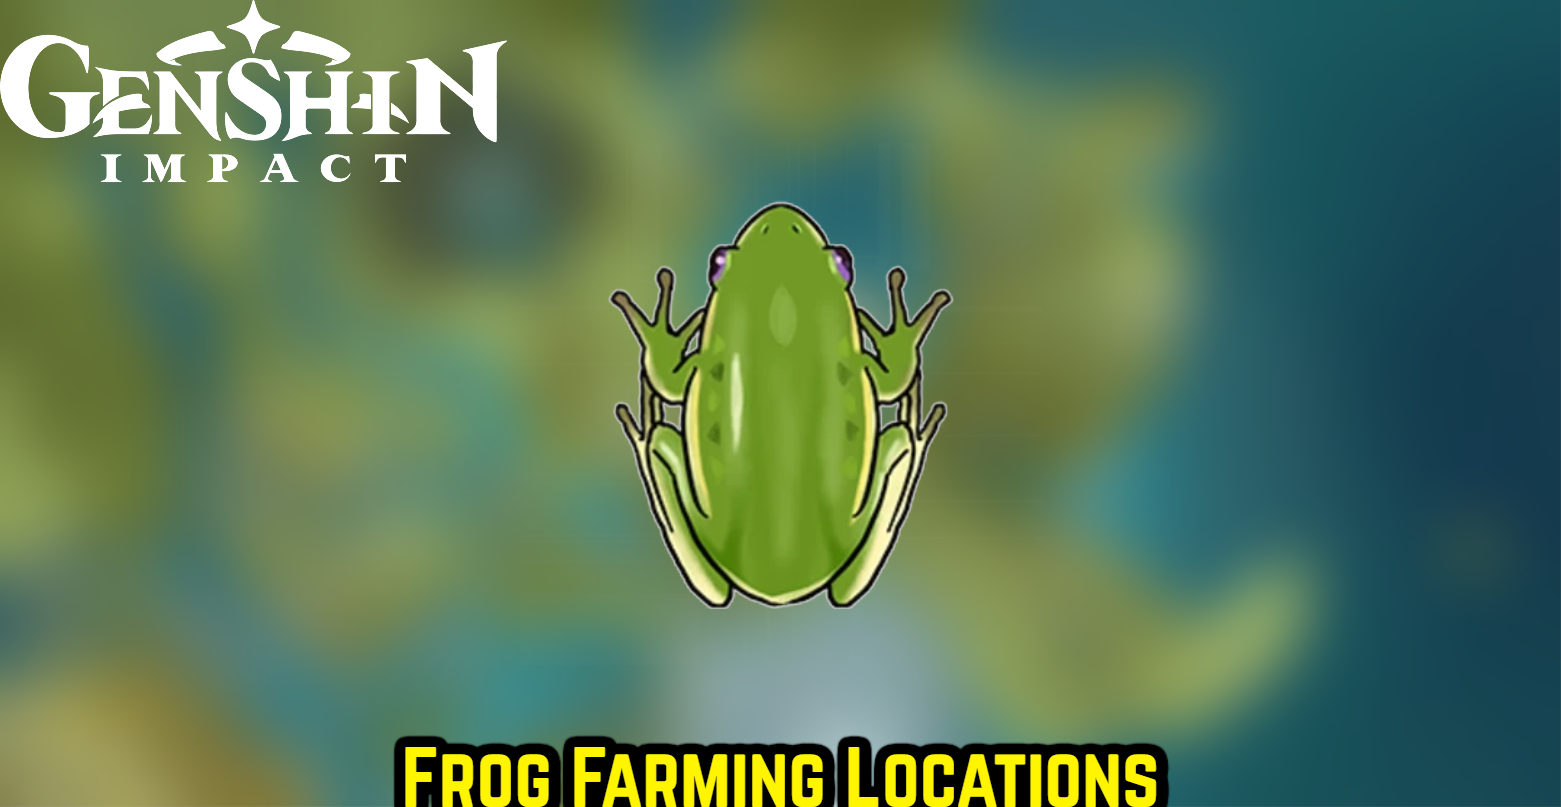 You are currently viewing Genshin Impact: Frog Farming Locations